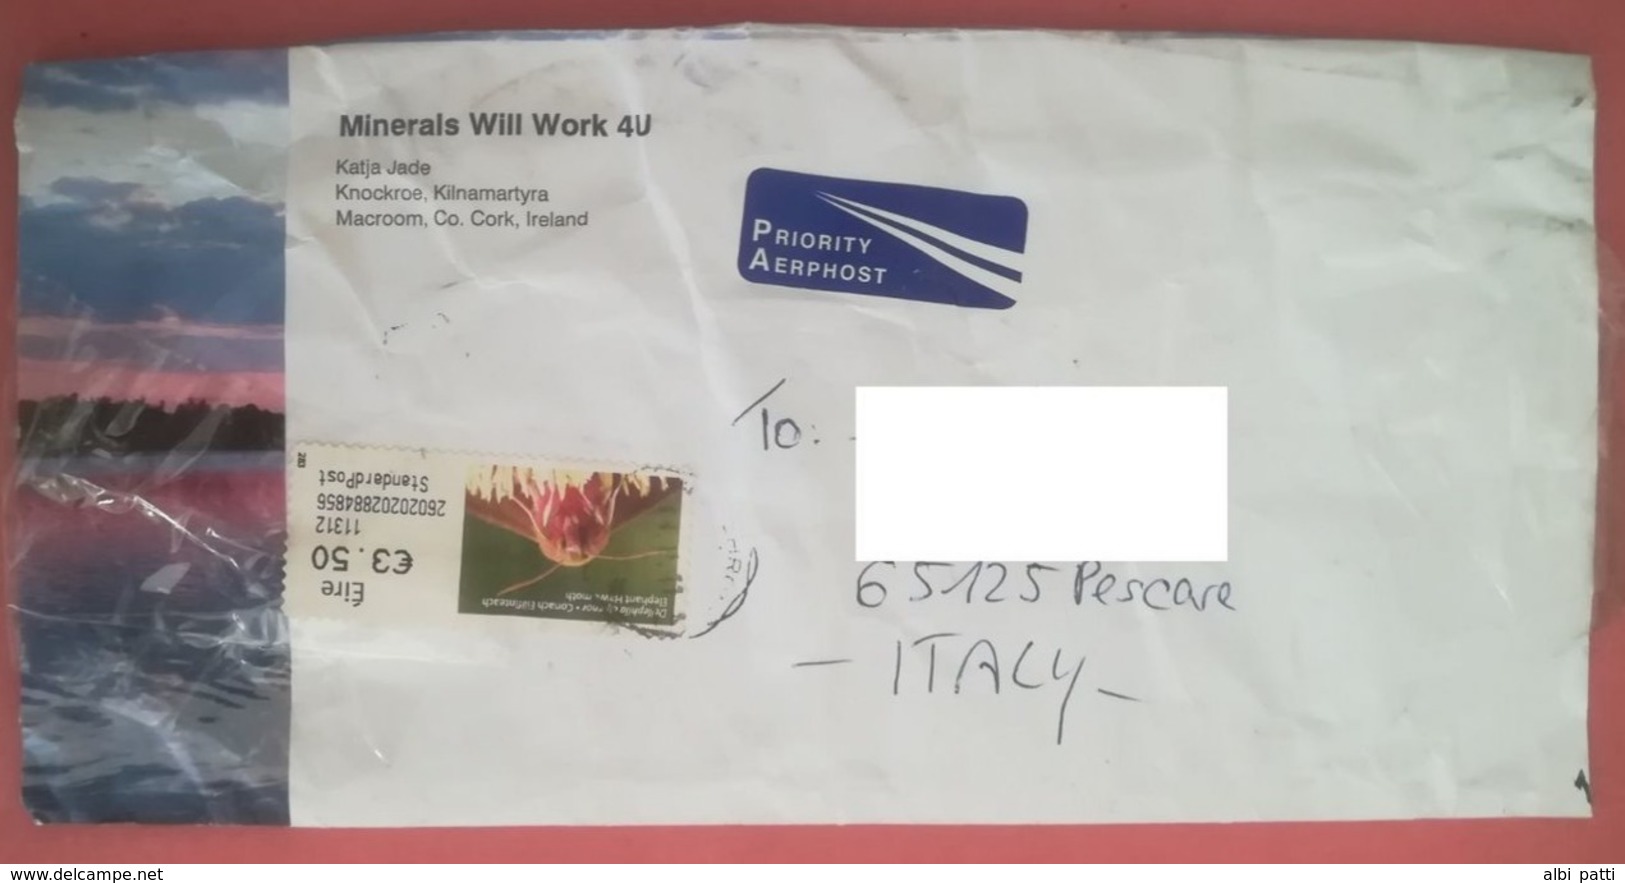 IRELAND COVER TO ITALY - Airmail